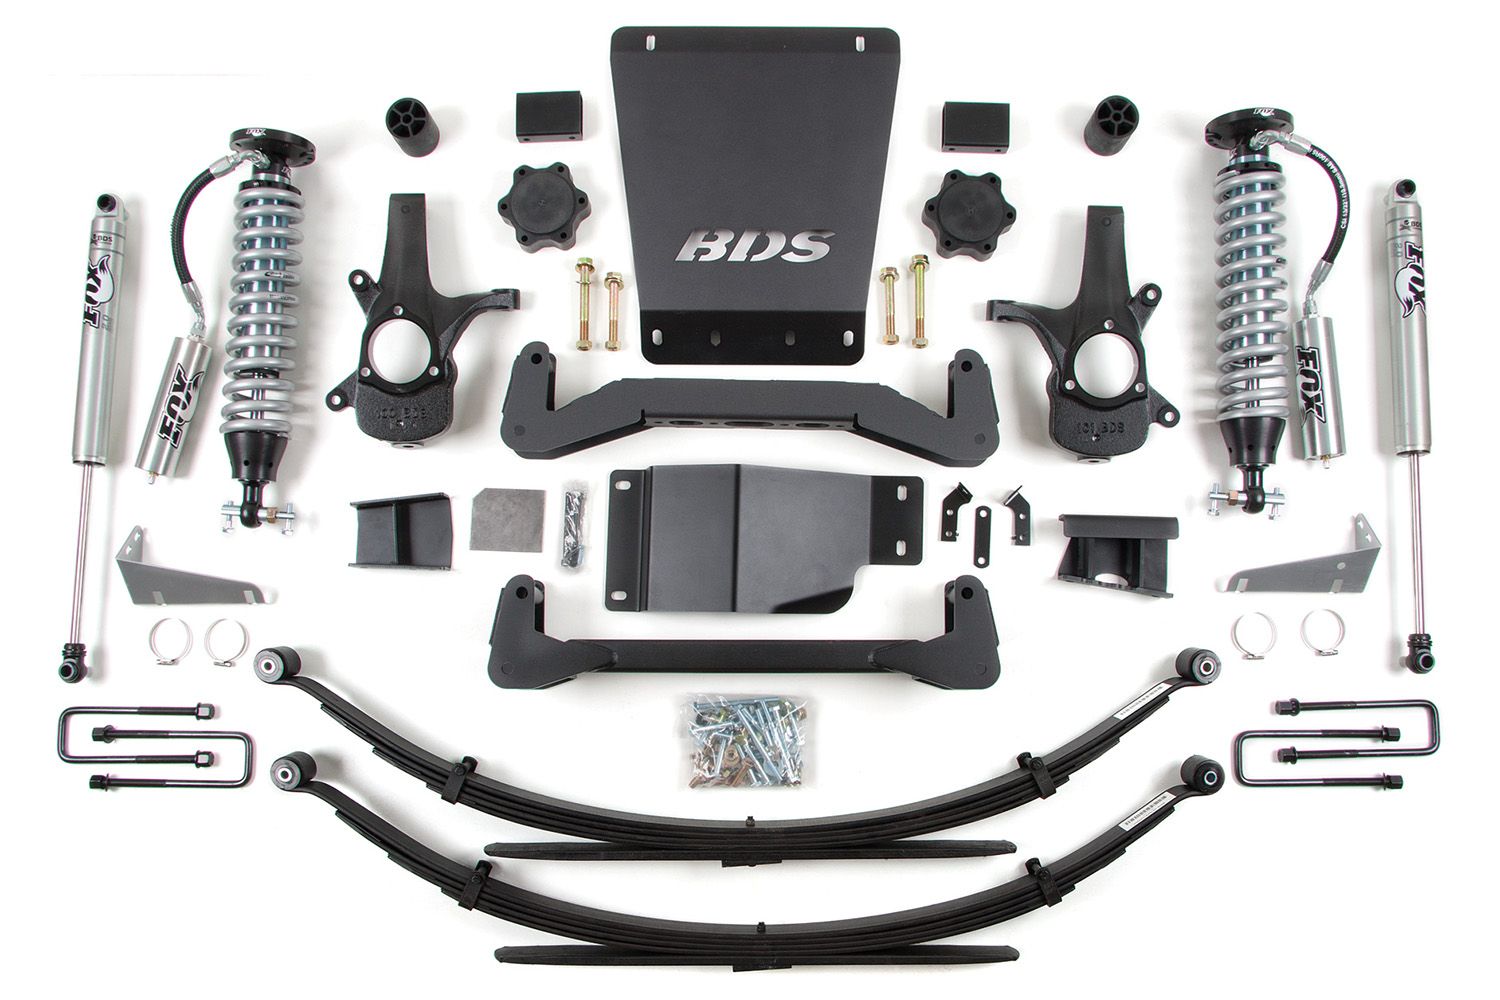 6" 2007-2013 GMC Sierra 1500 4WD Fox Coil Over Lift Kit by BDS Suspension